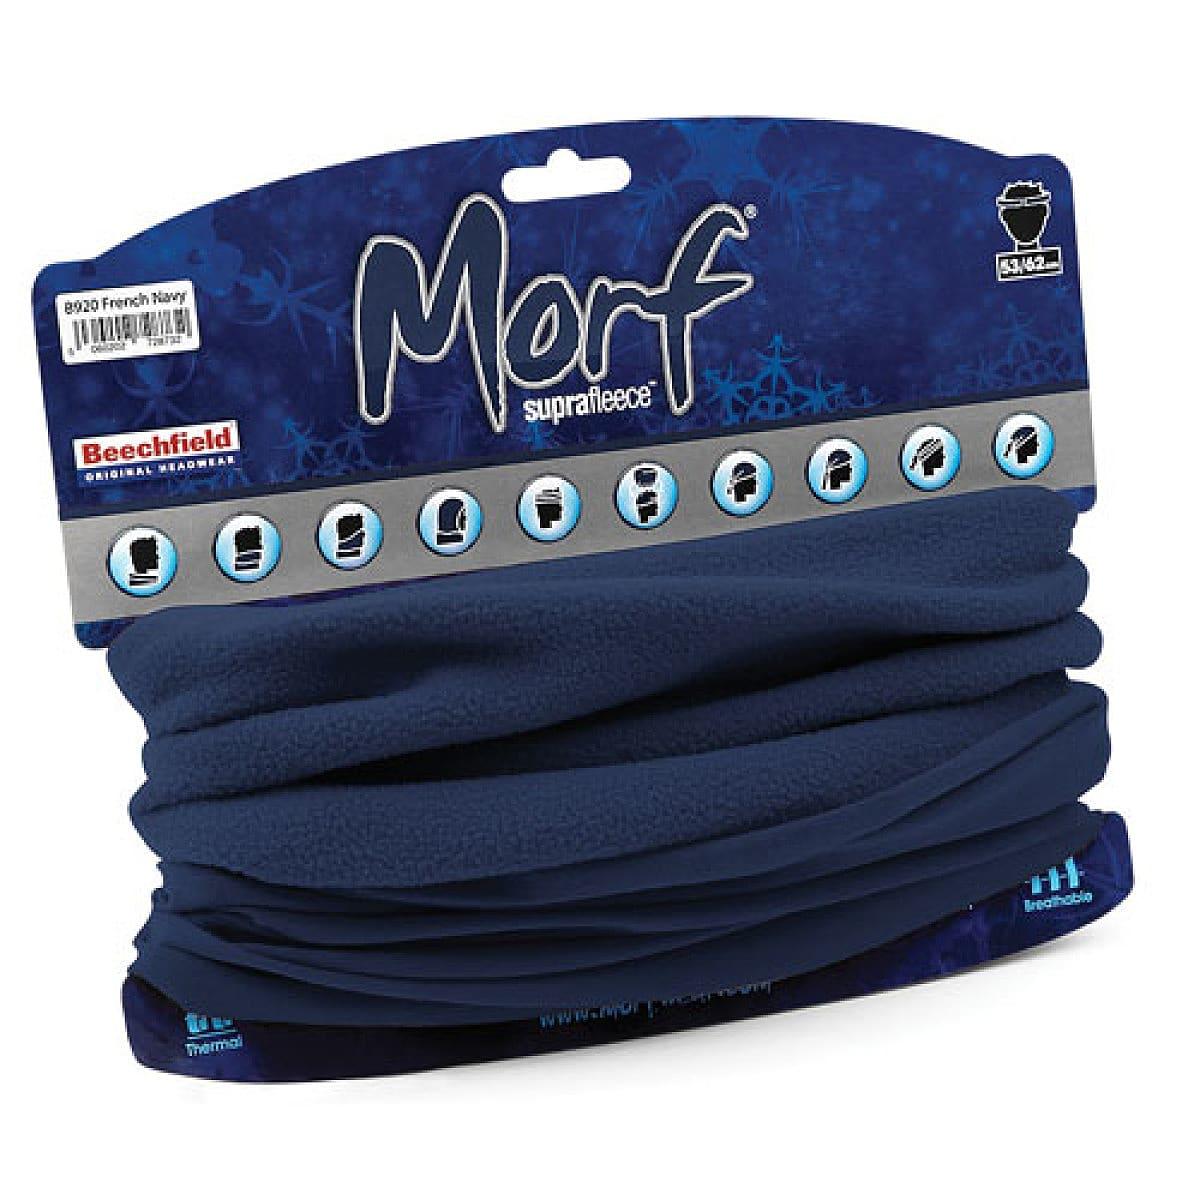 Beechfield Morf Superfleece Snood in French Navy (Product Code: B920)